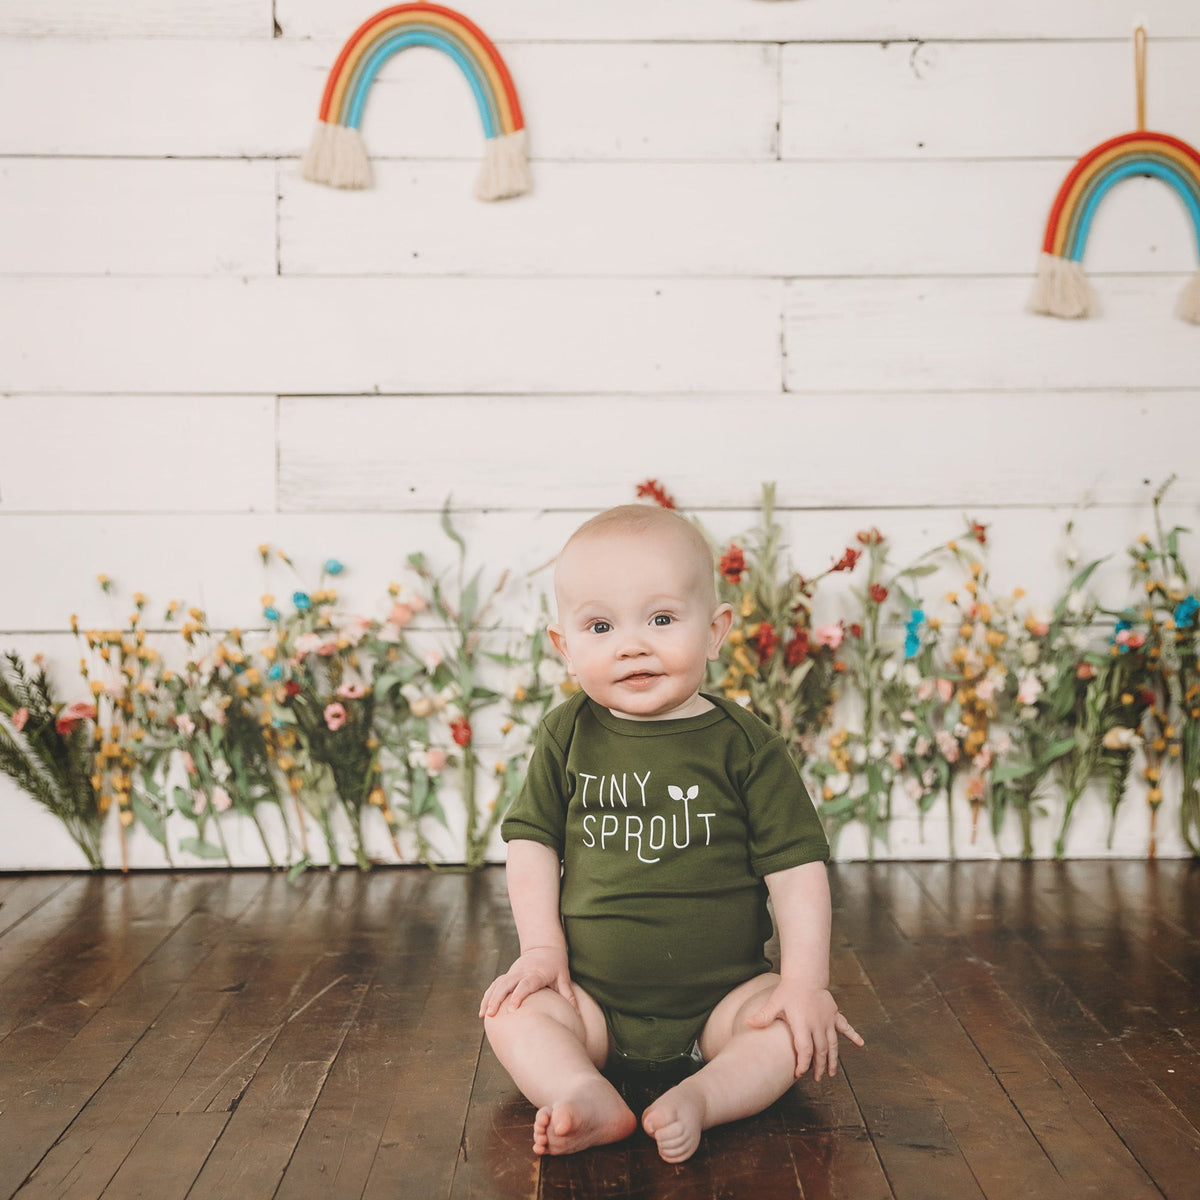 PRE-ORDER - Tiny Sprout baby bodysuit / onesie - Sweetpea and Co.